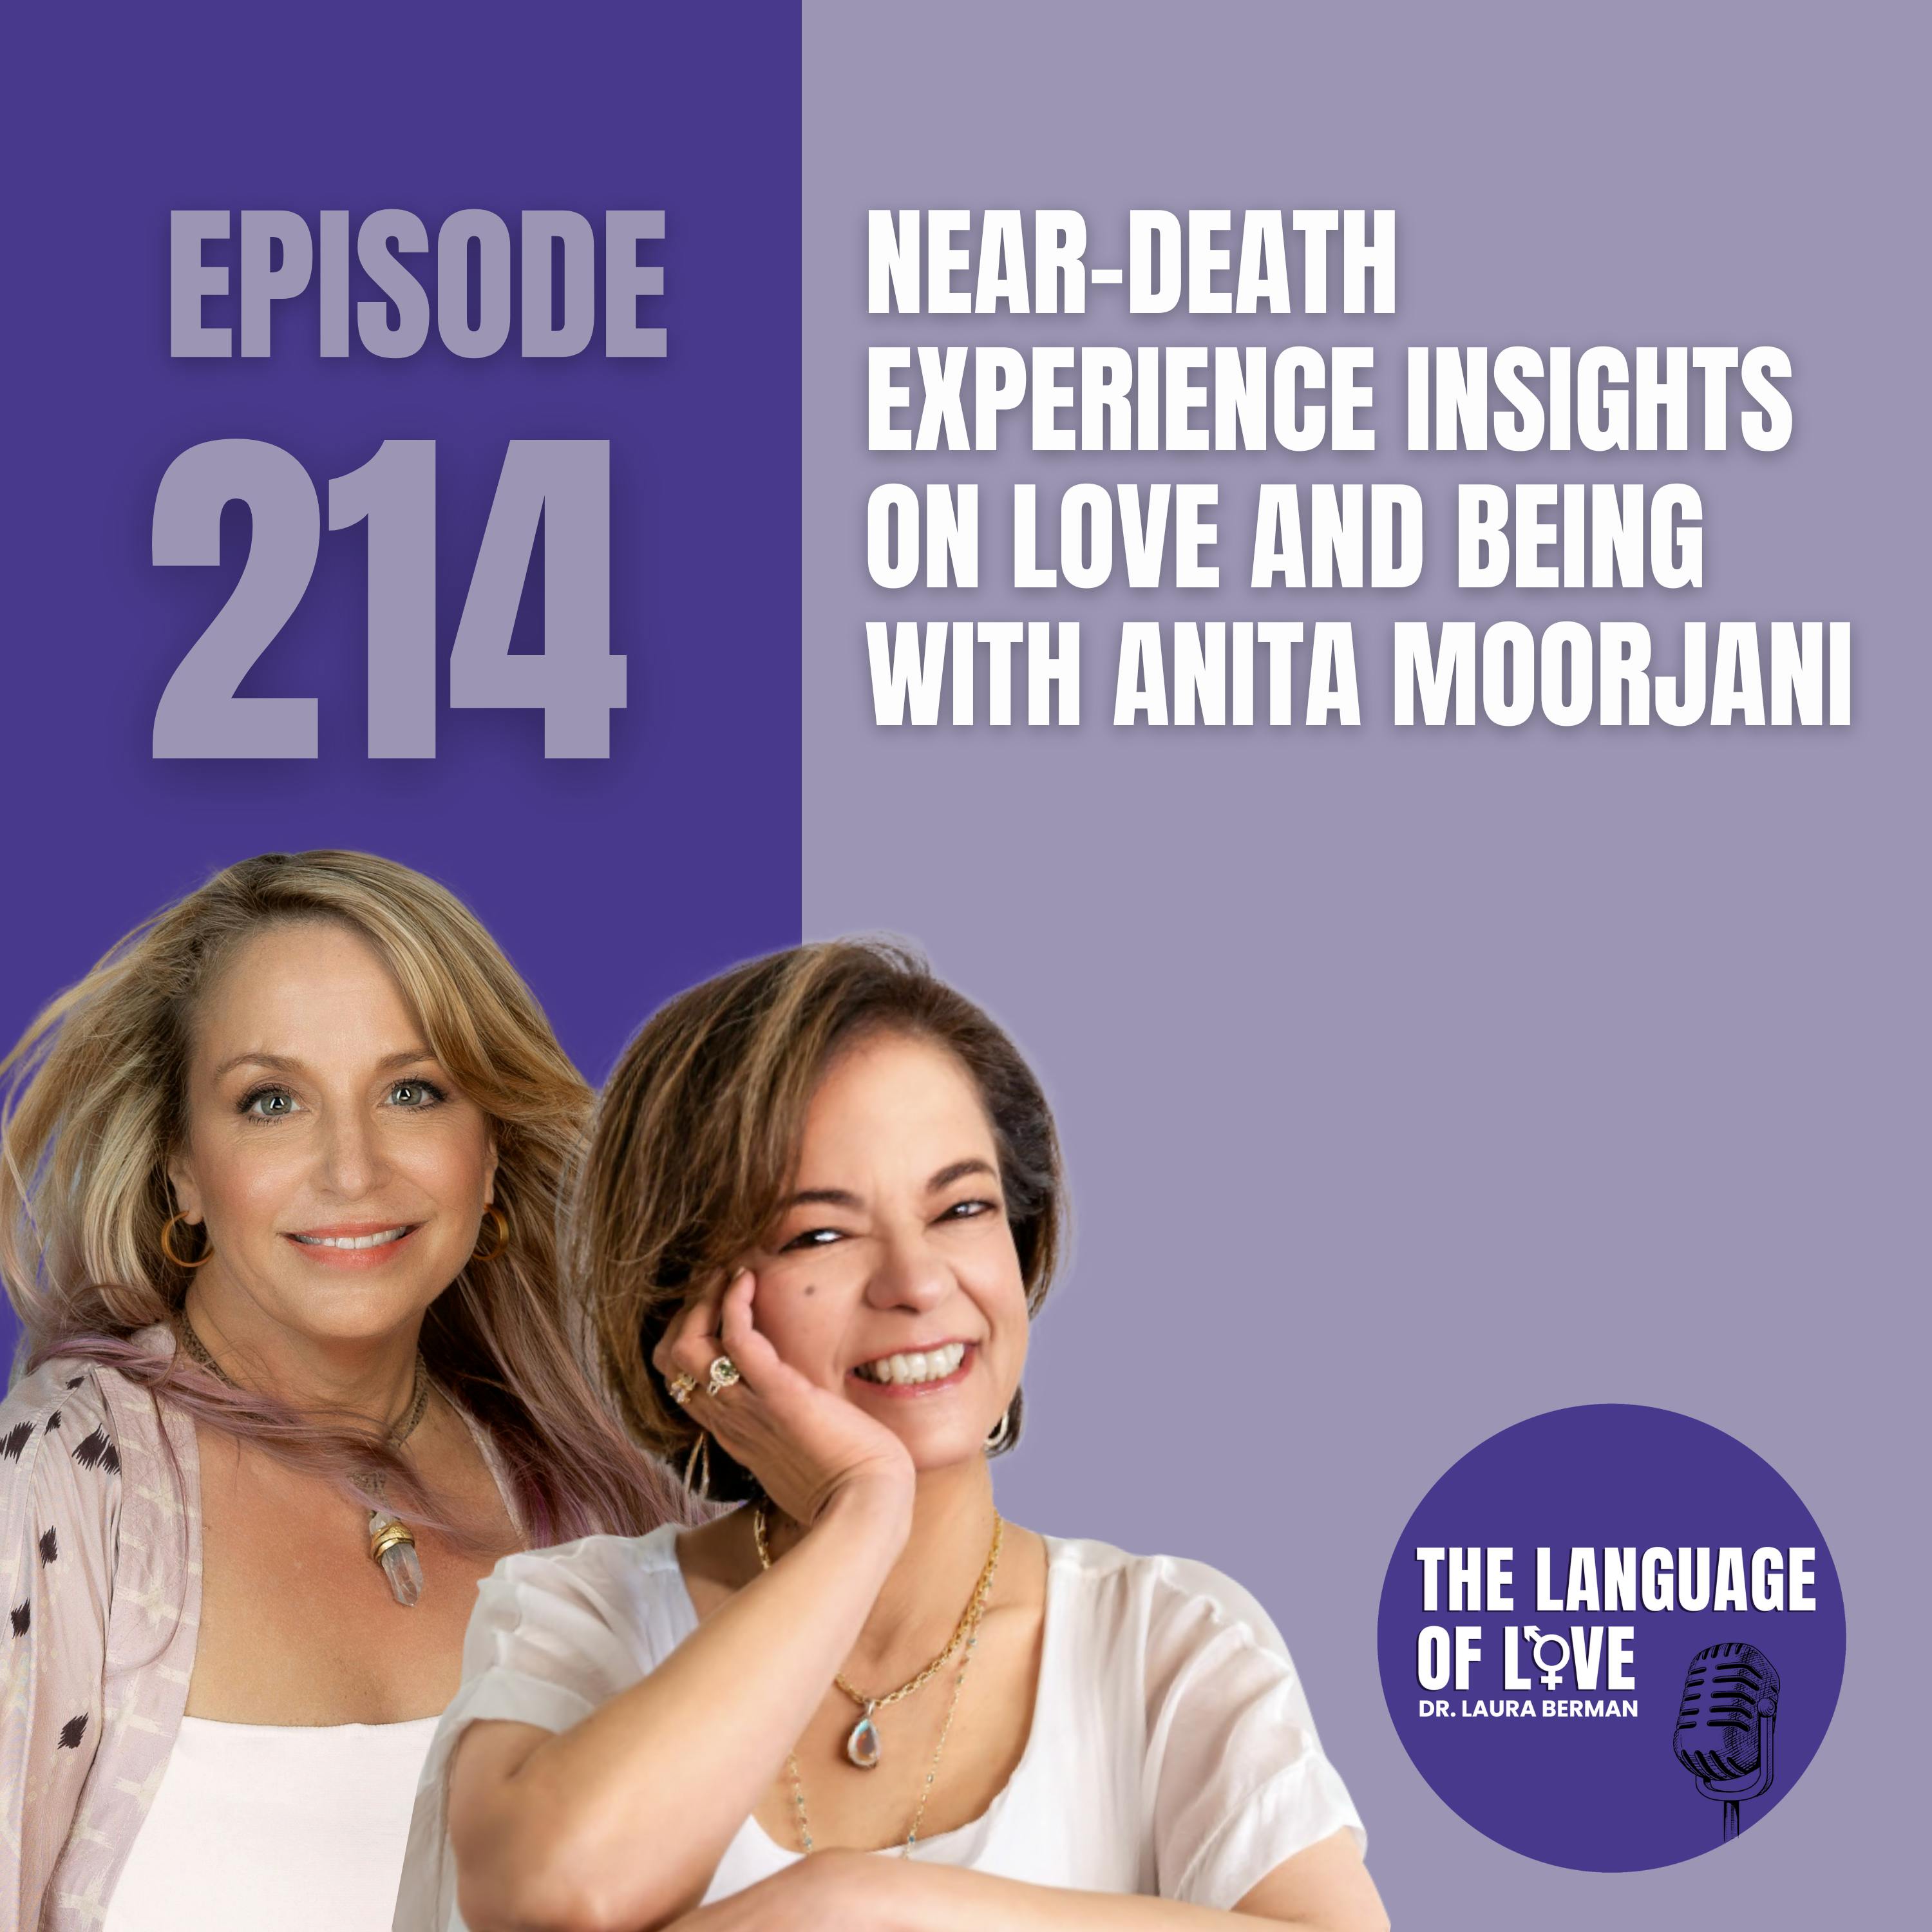 Near-Death Experience Insights on Love and Being with Anita Moorjani